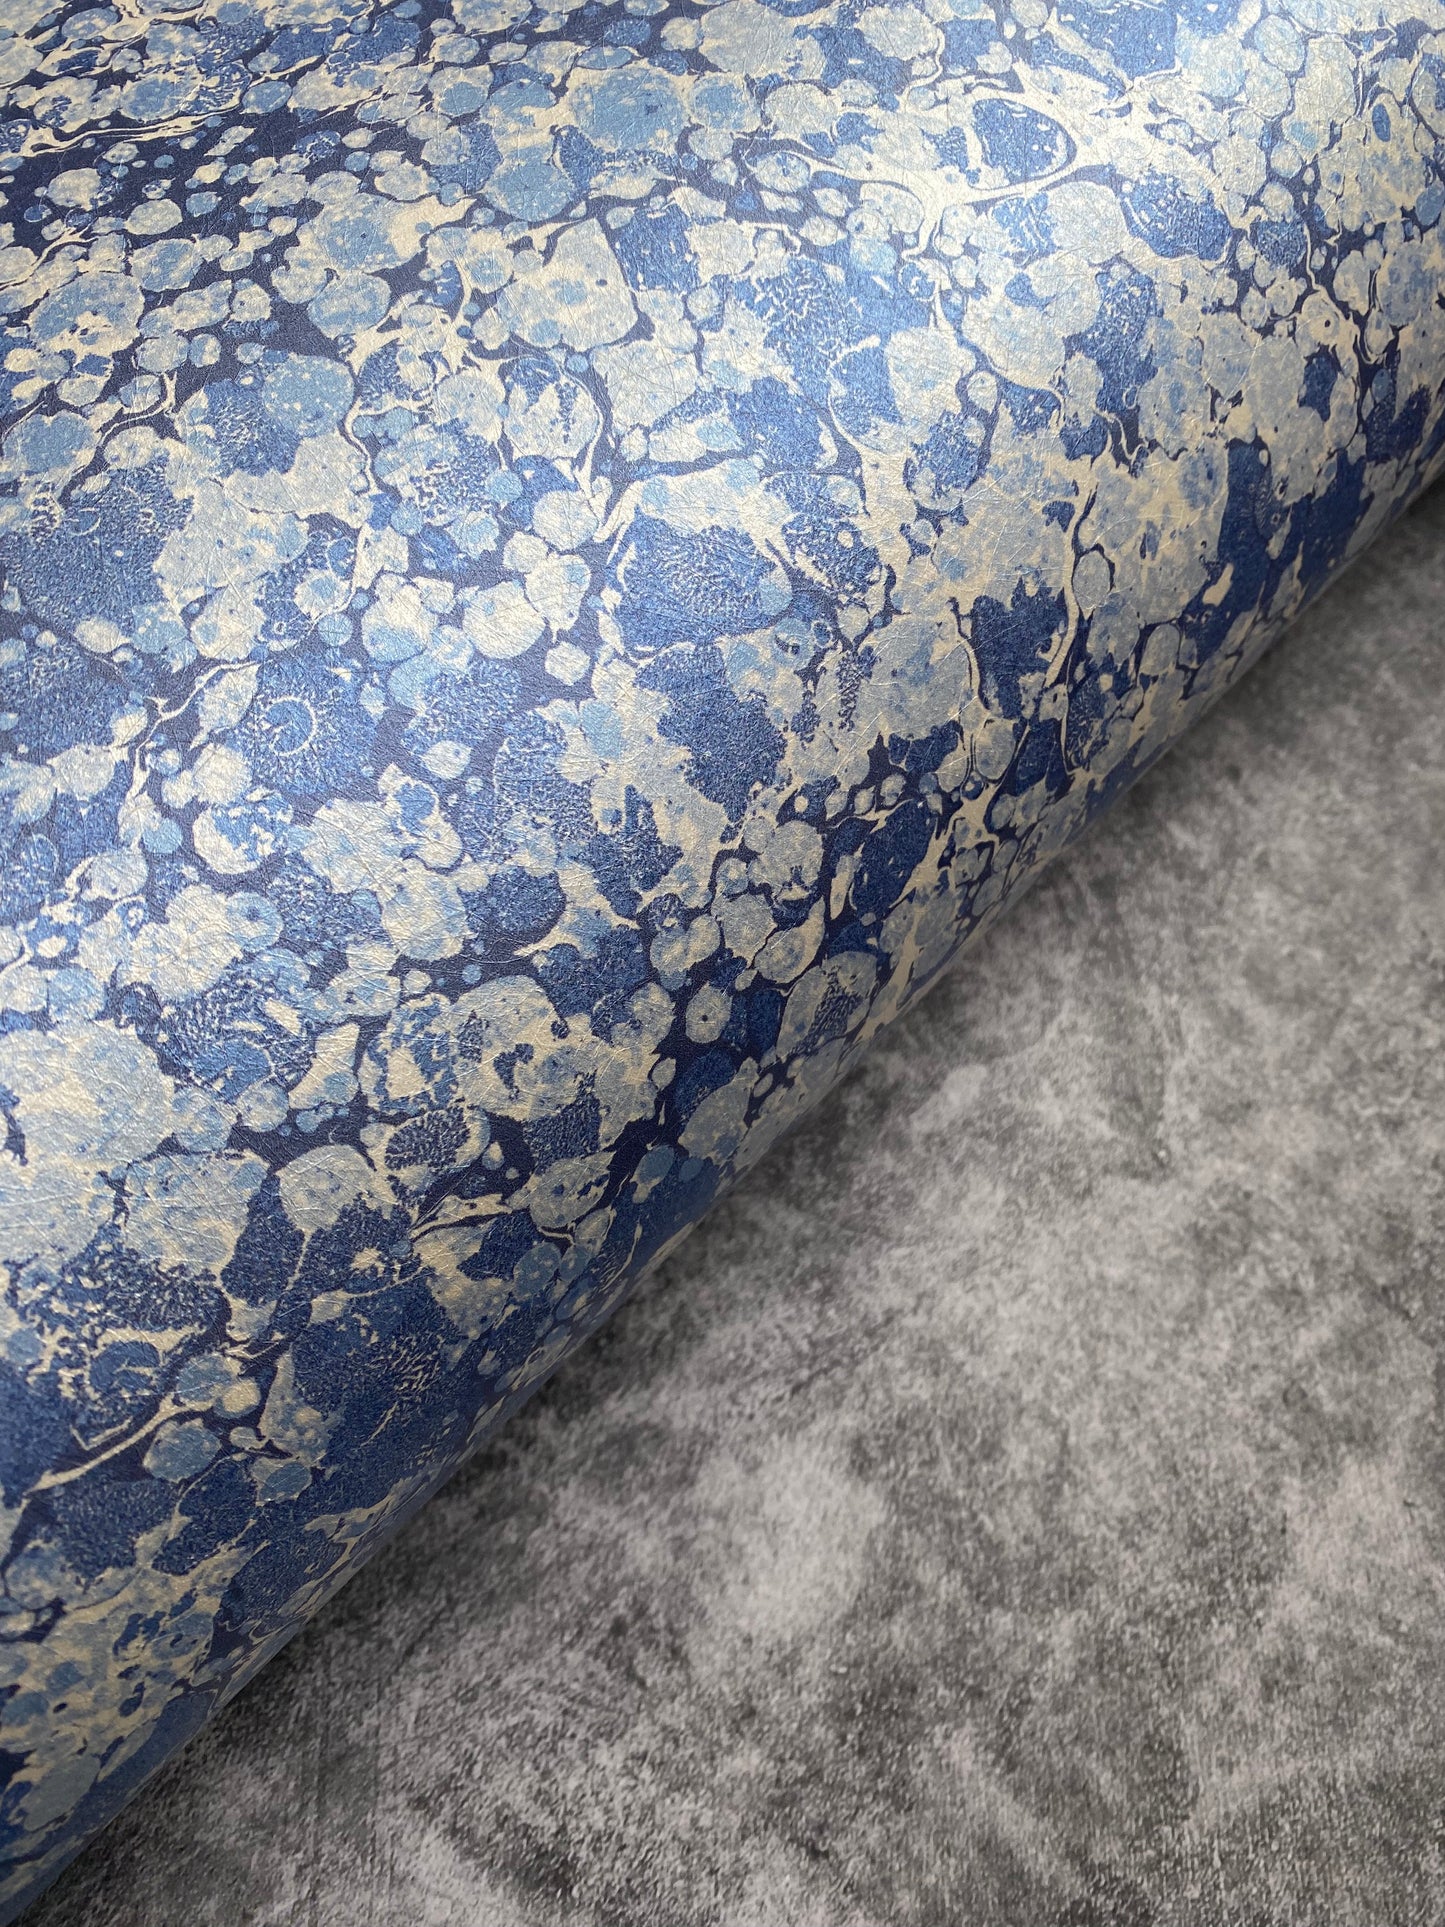 In Stock: Printed Wallpaper - 'Ditzy' Col: Blue Daze - Mica Coated Non-Woven